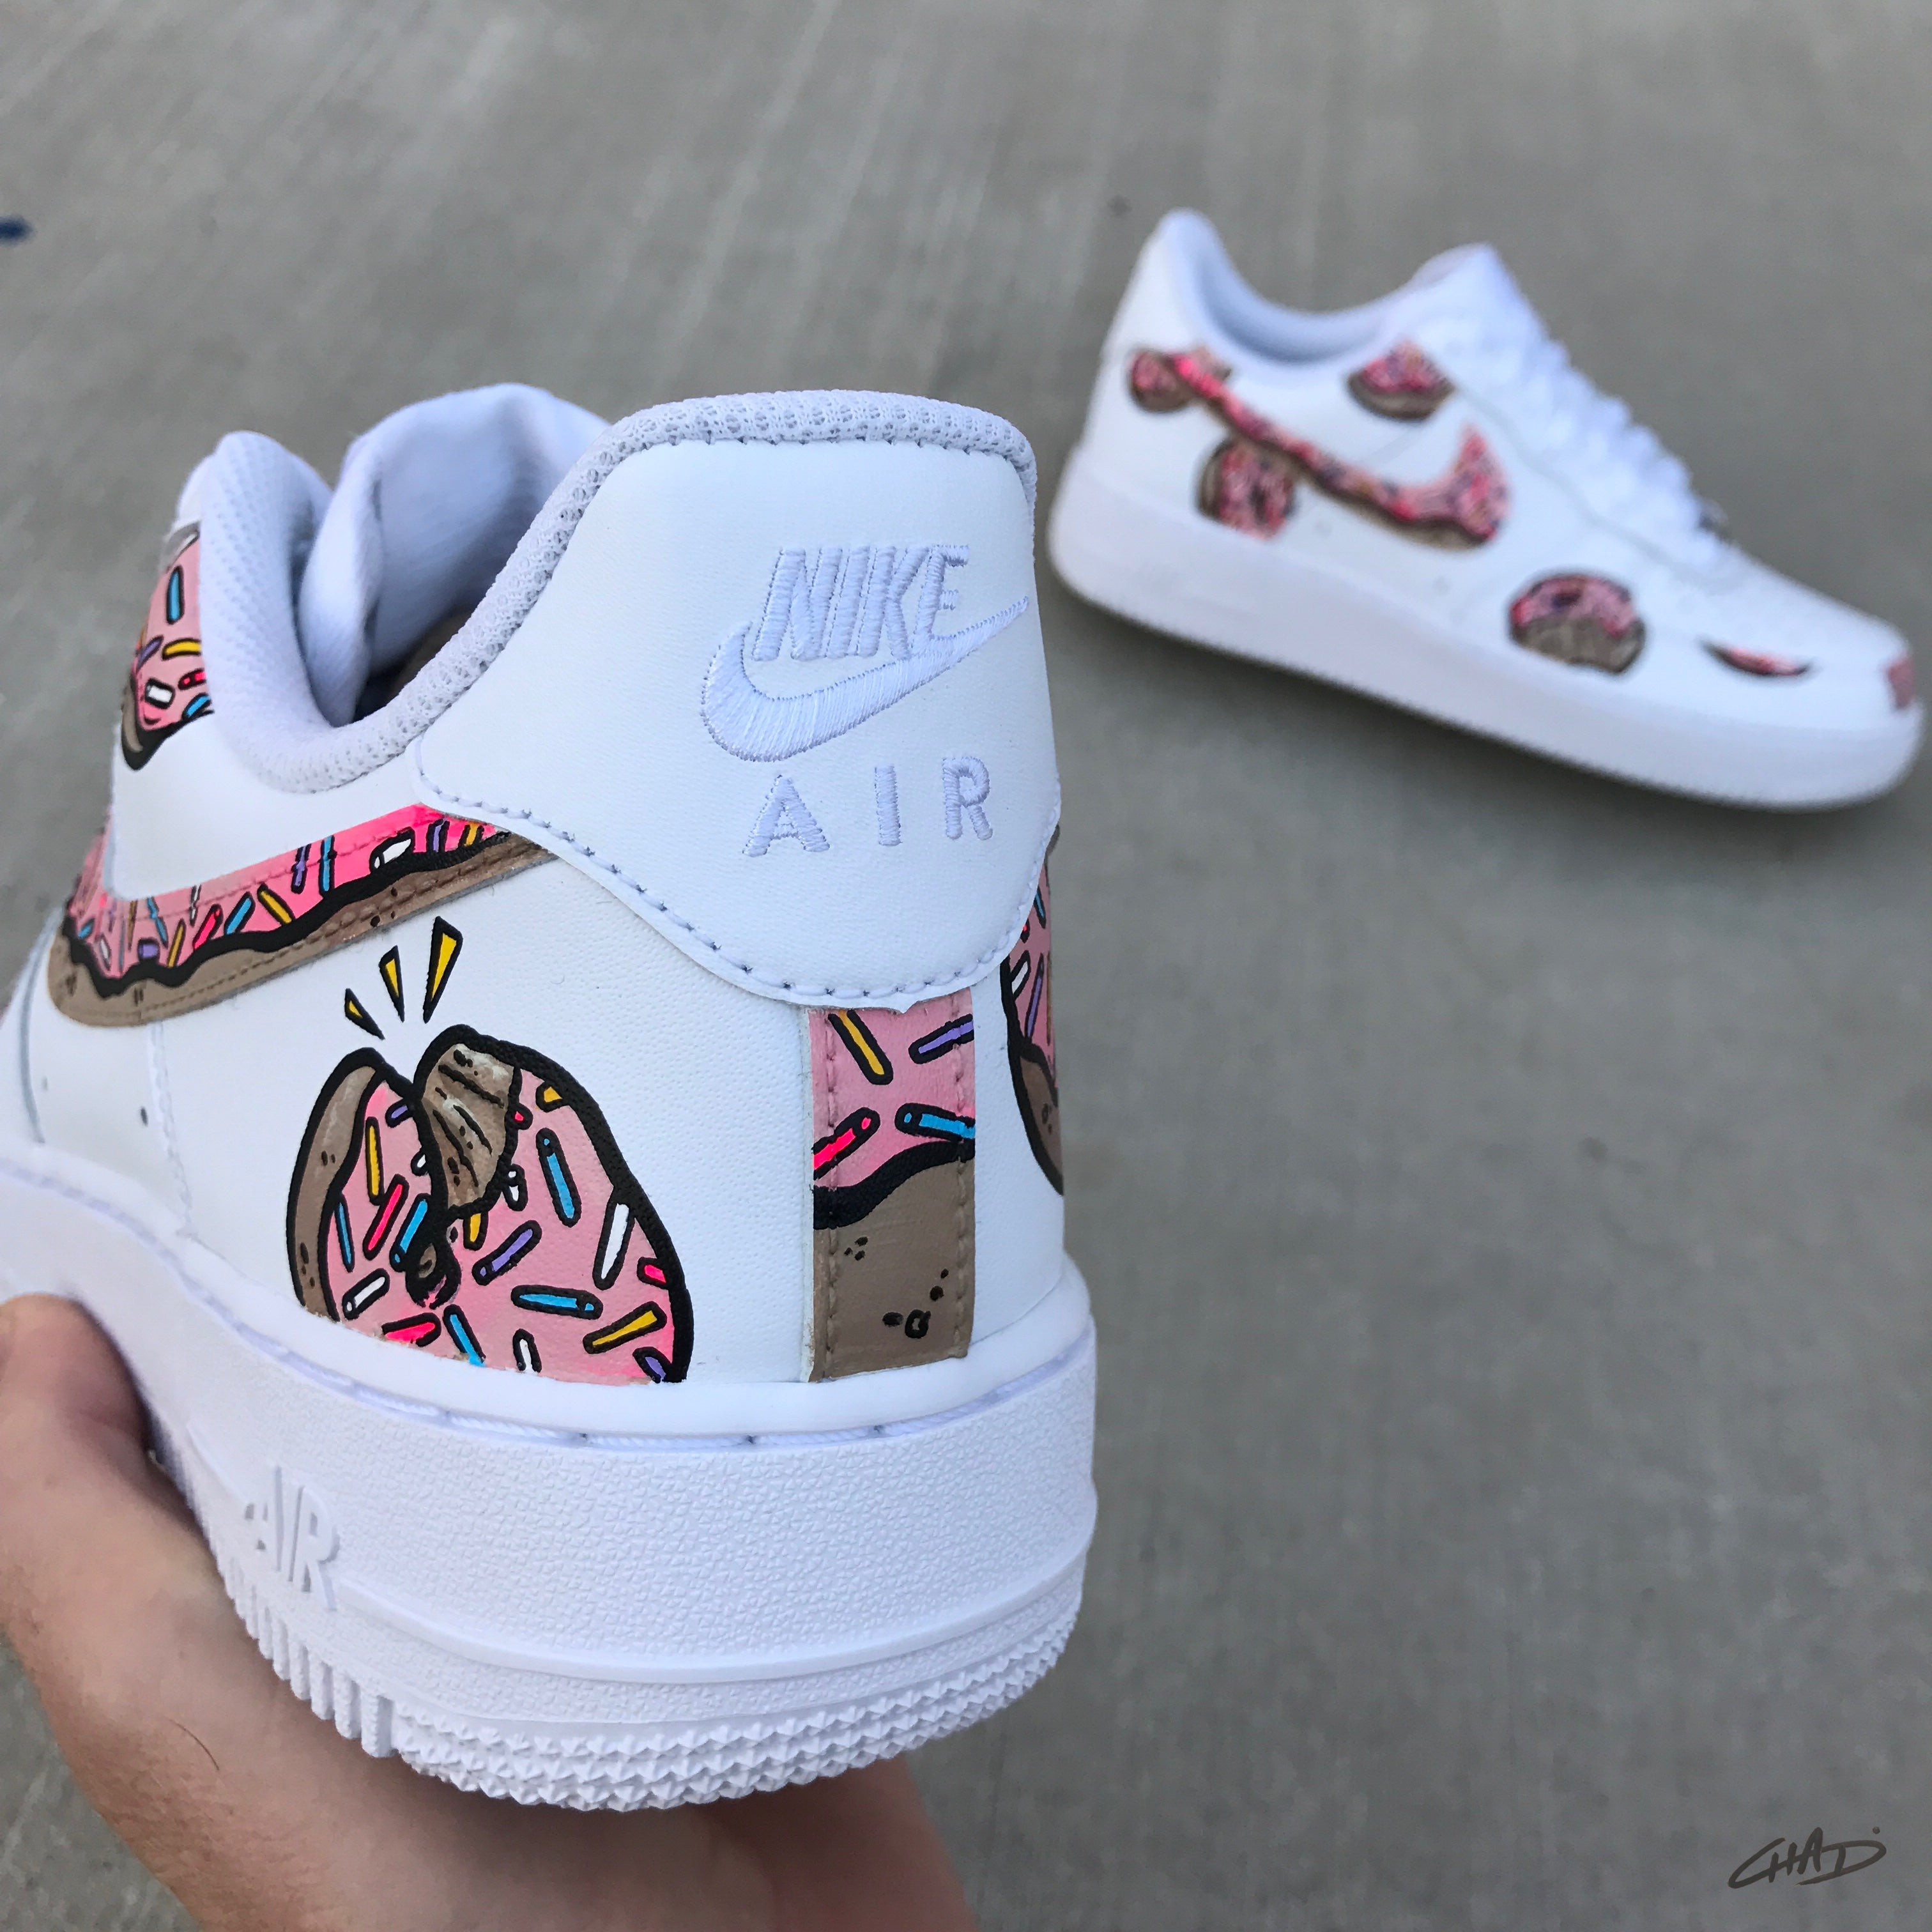 Doh! Nike Air Force 1 shoes